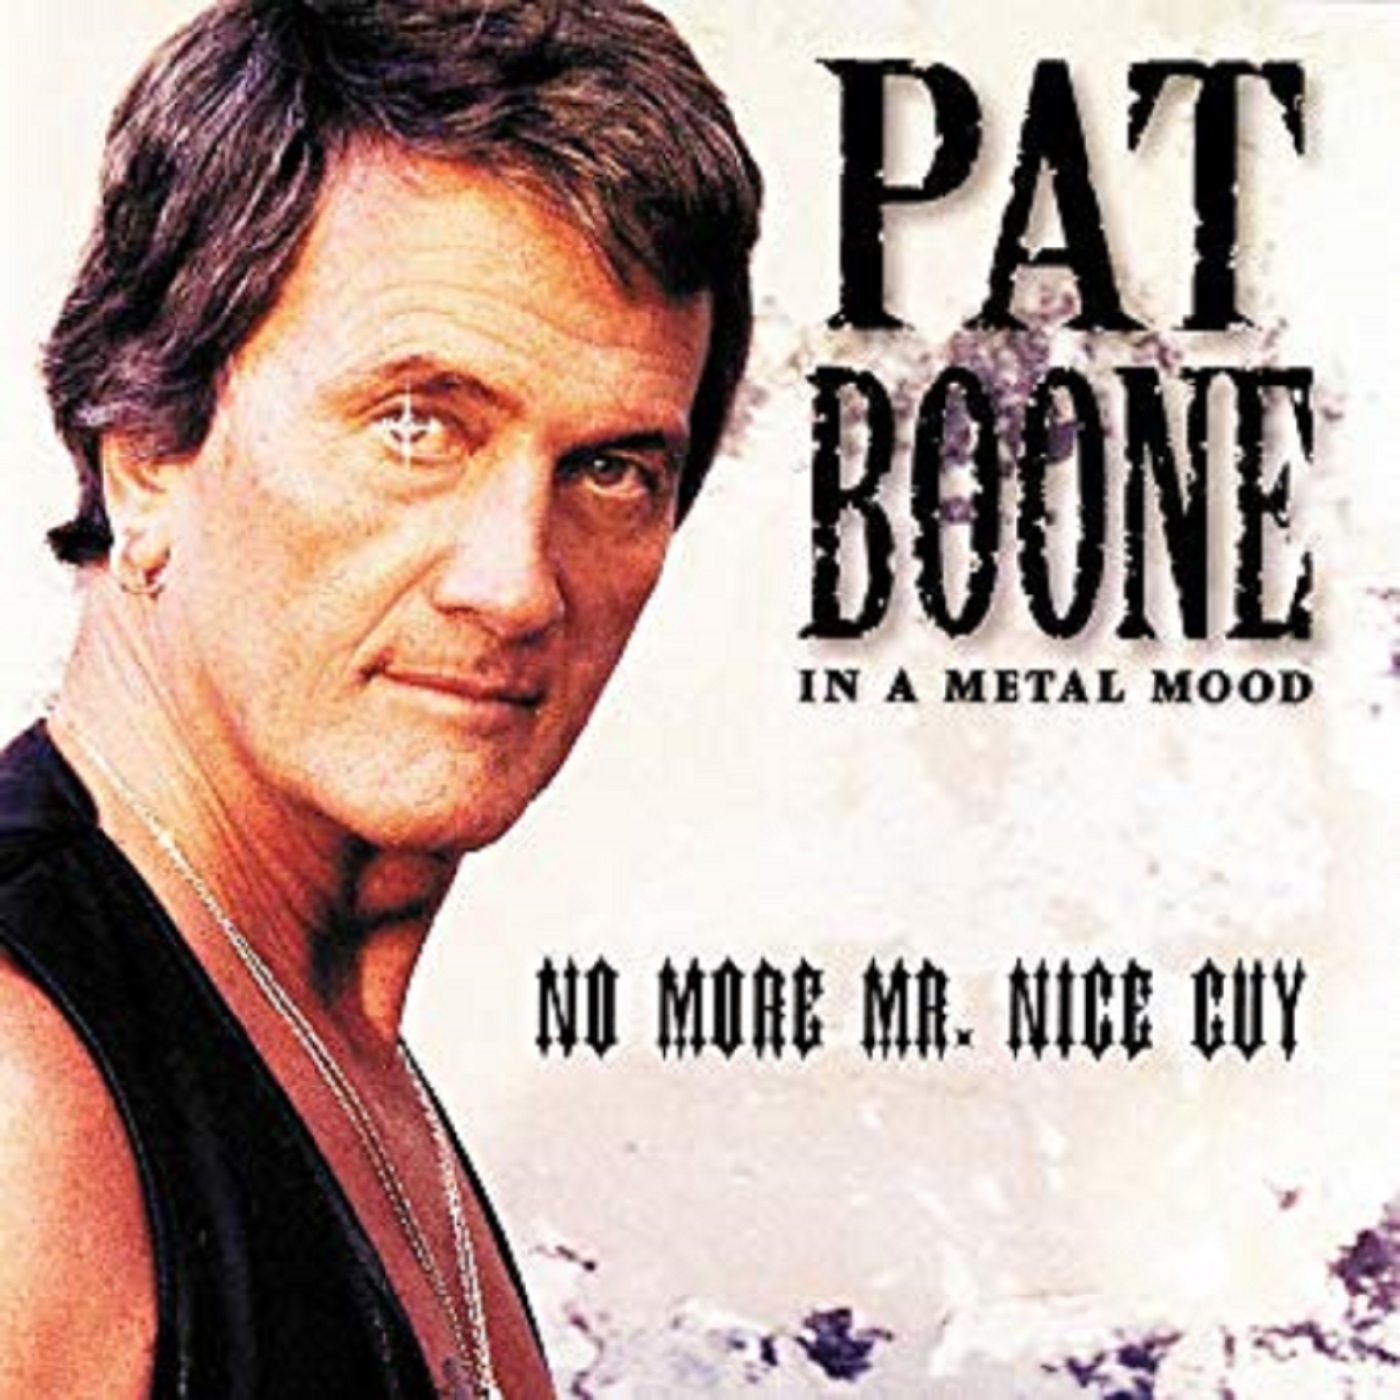 Pat Boone’s ”In A Metal Mood” (with Rick Reid)